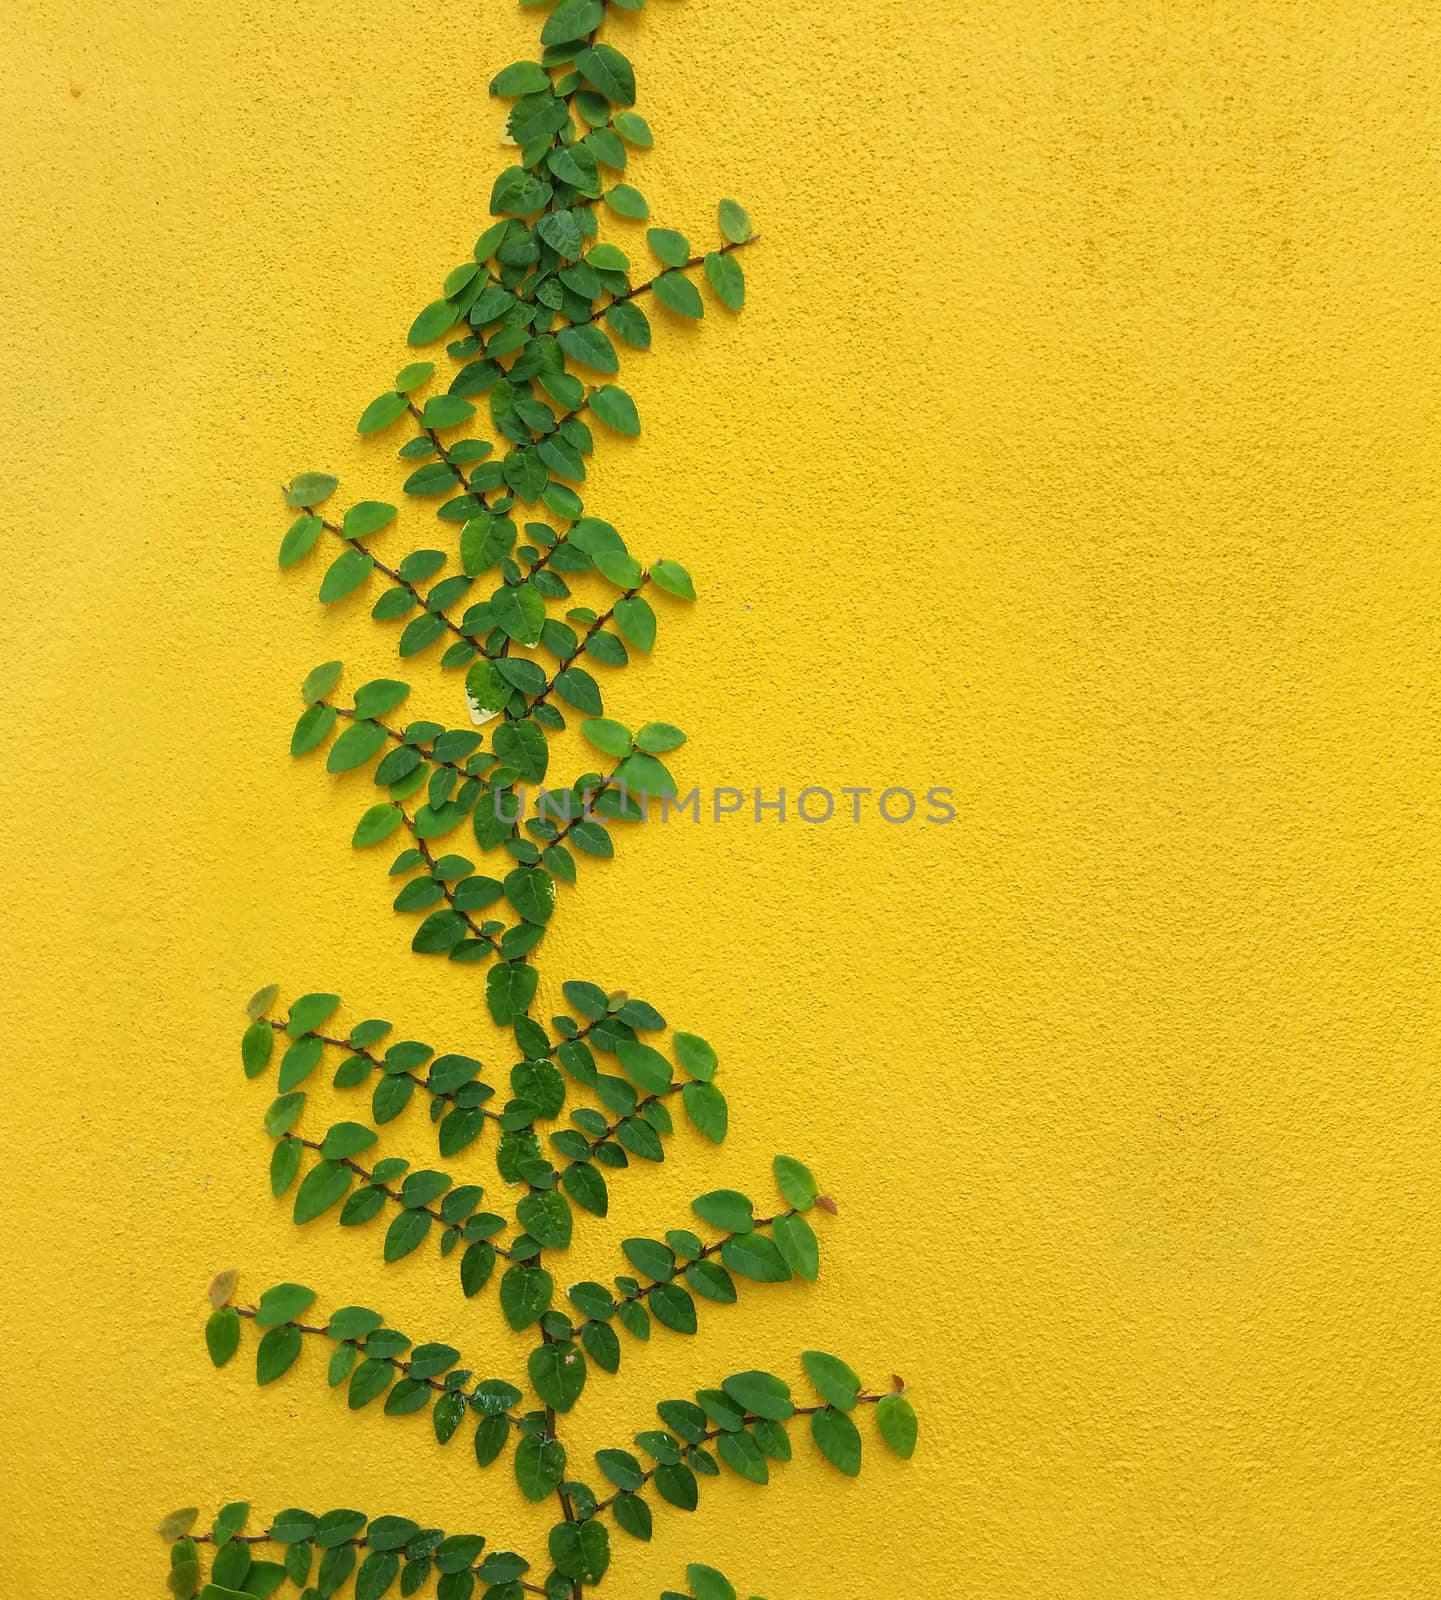 Coatbuttons Mexican daisy plant on yellow wall by iampuay